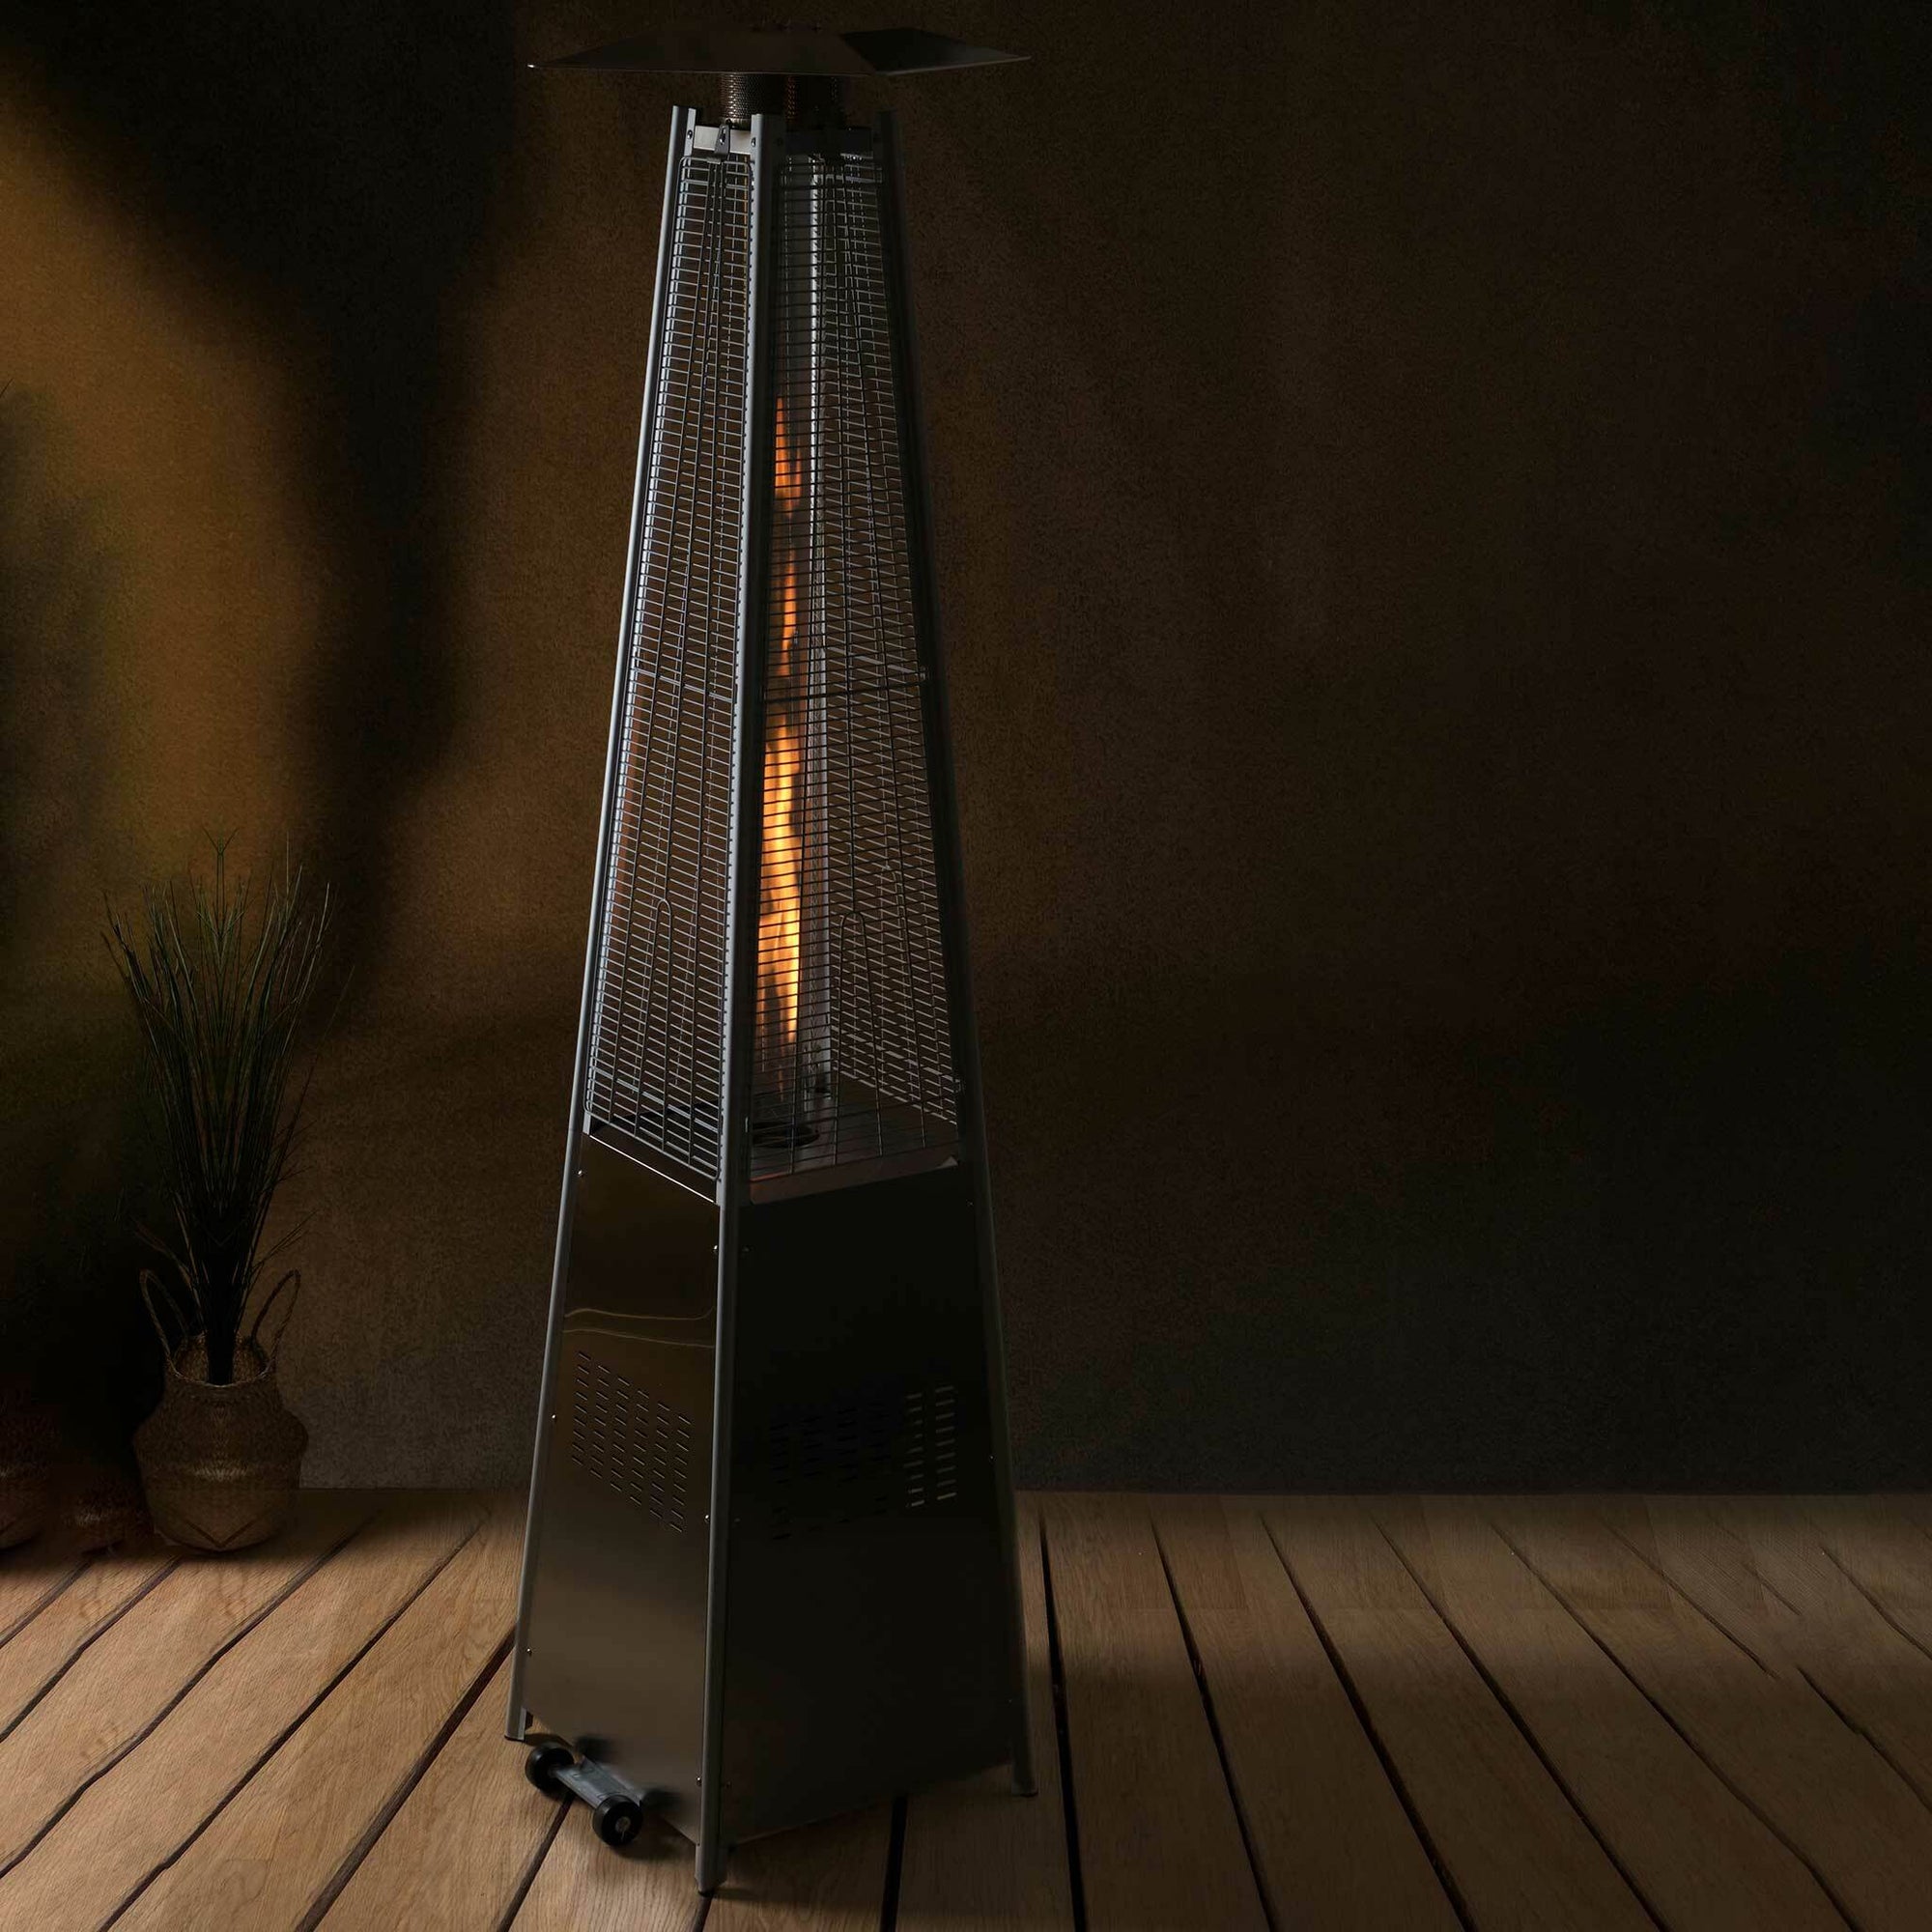 Fornorth Patio Heater Pyramid 13kW gas powered, stainless steel